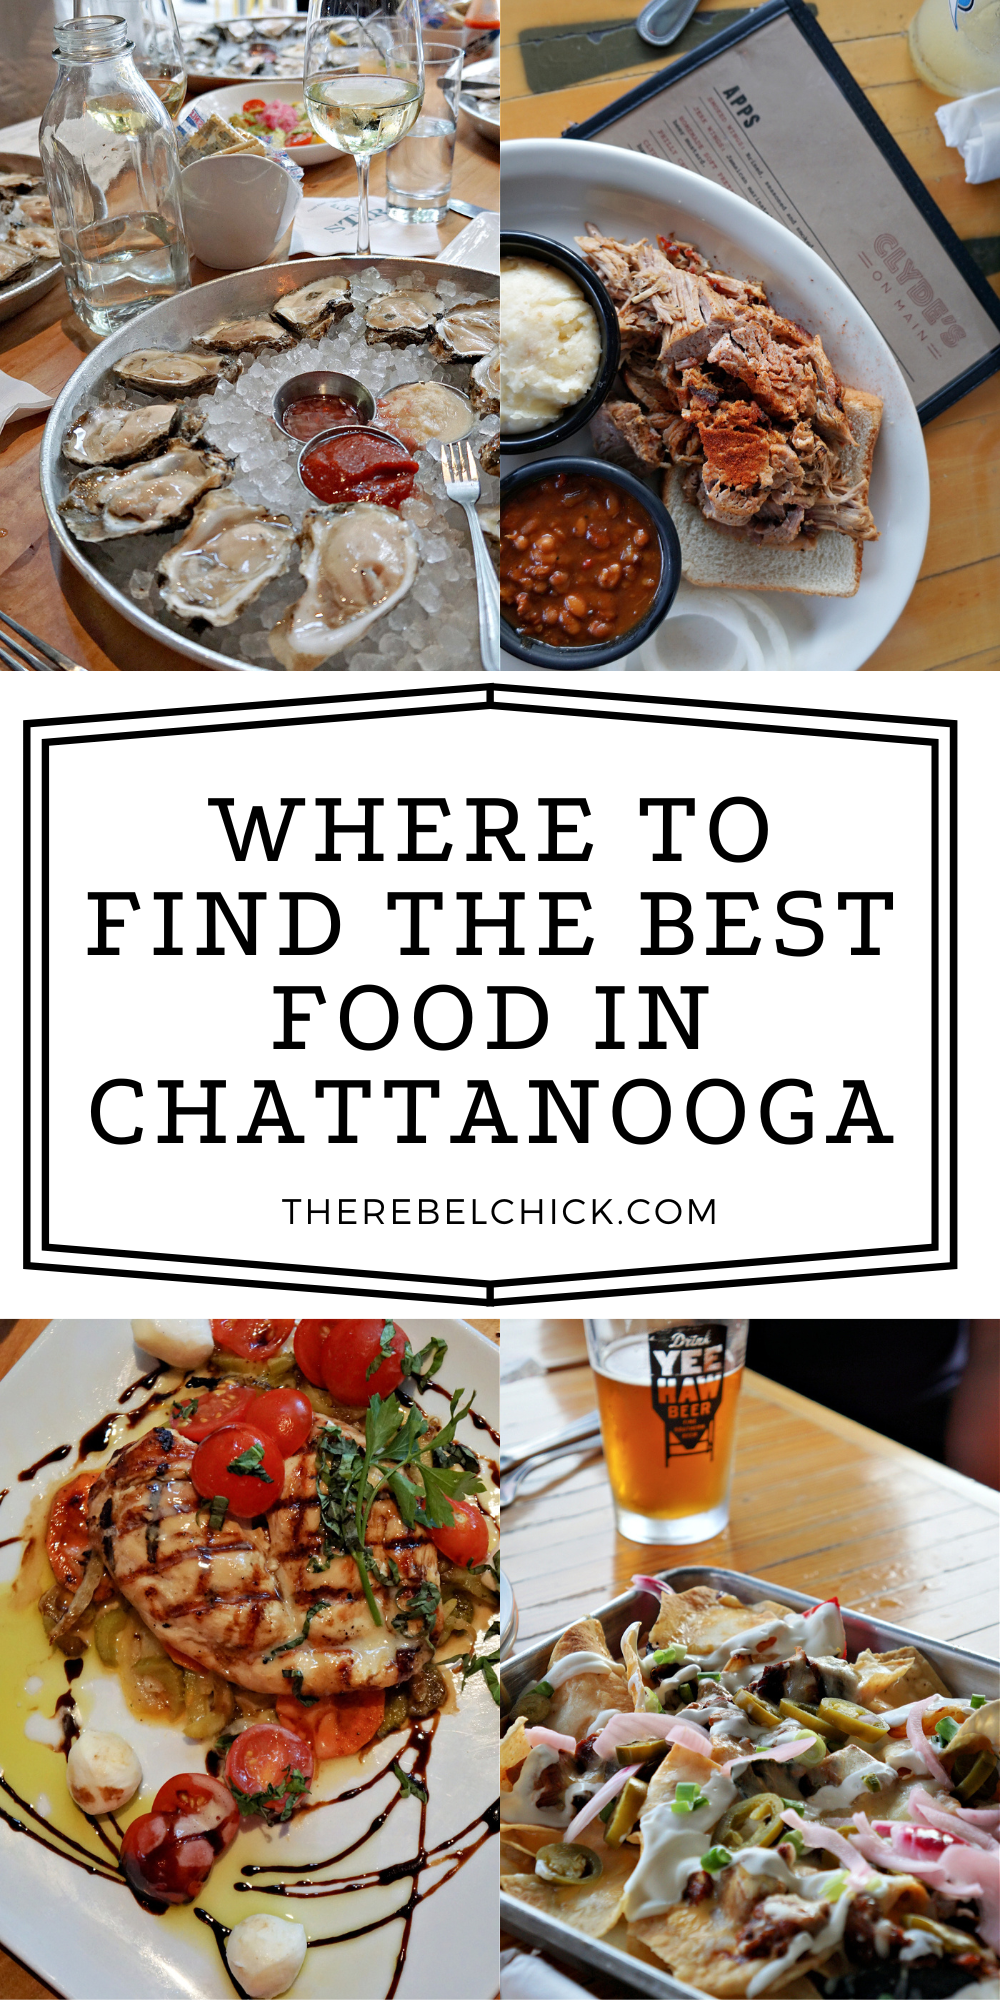 Where to find the best food in Chattanooga